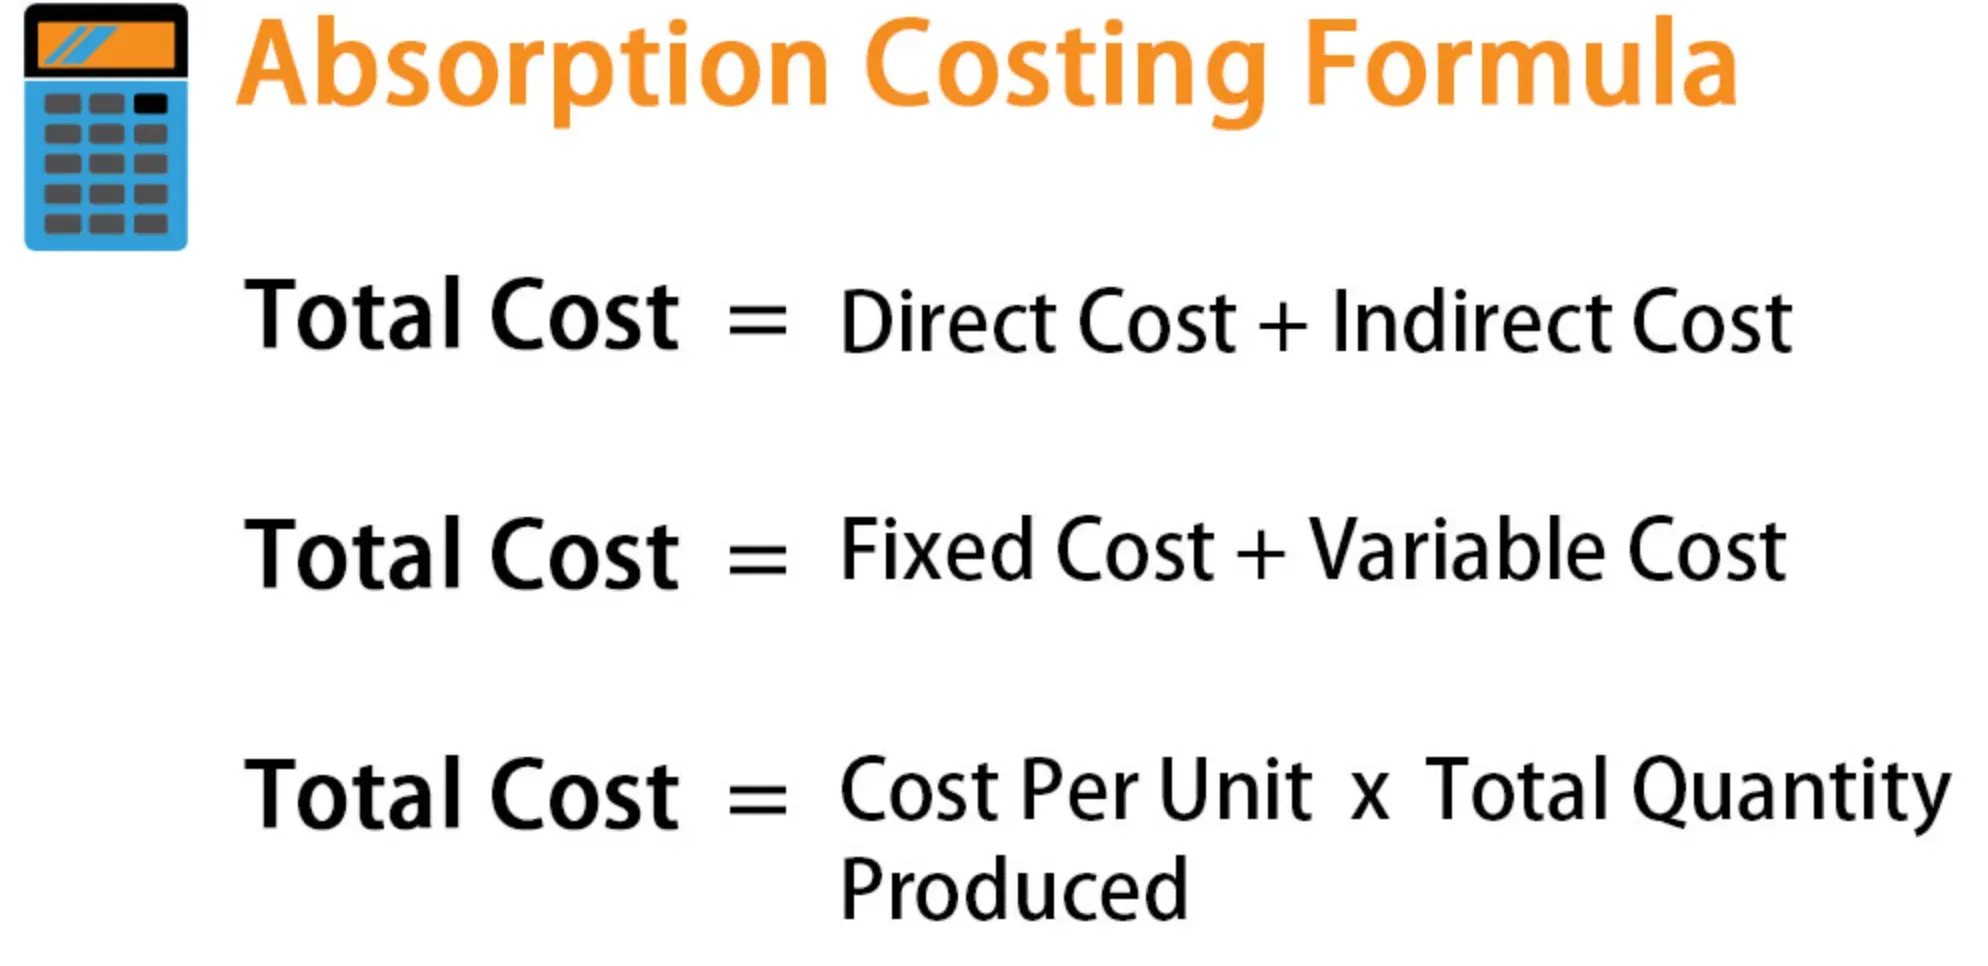 Absorption Costing in Practice